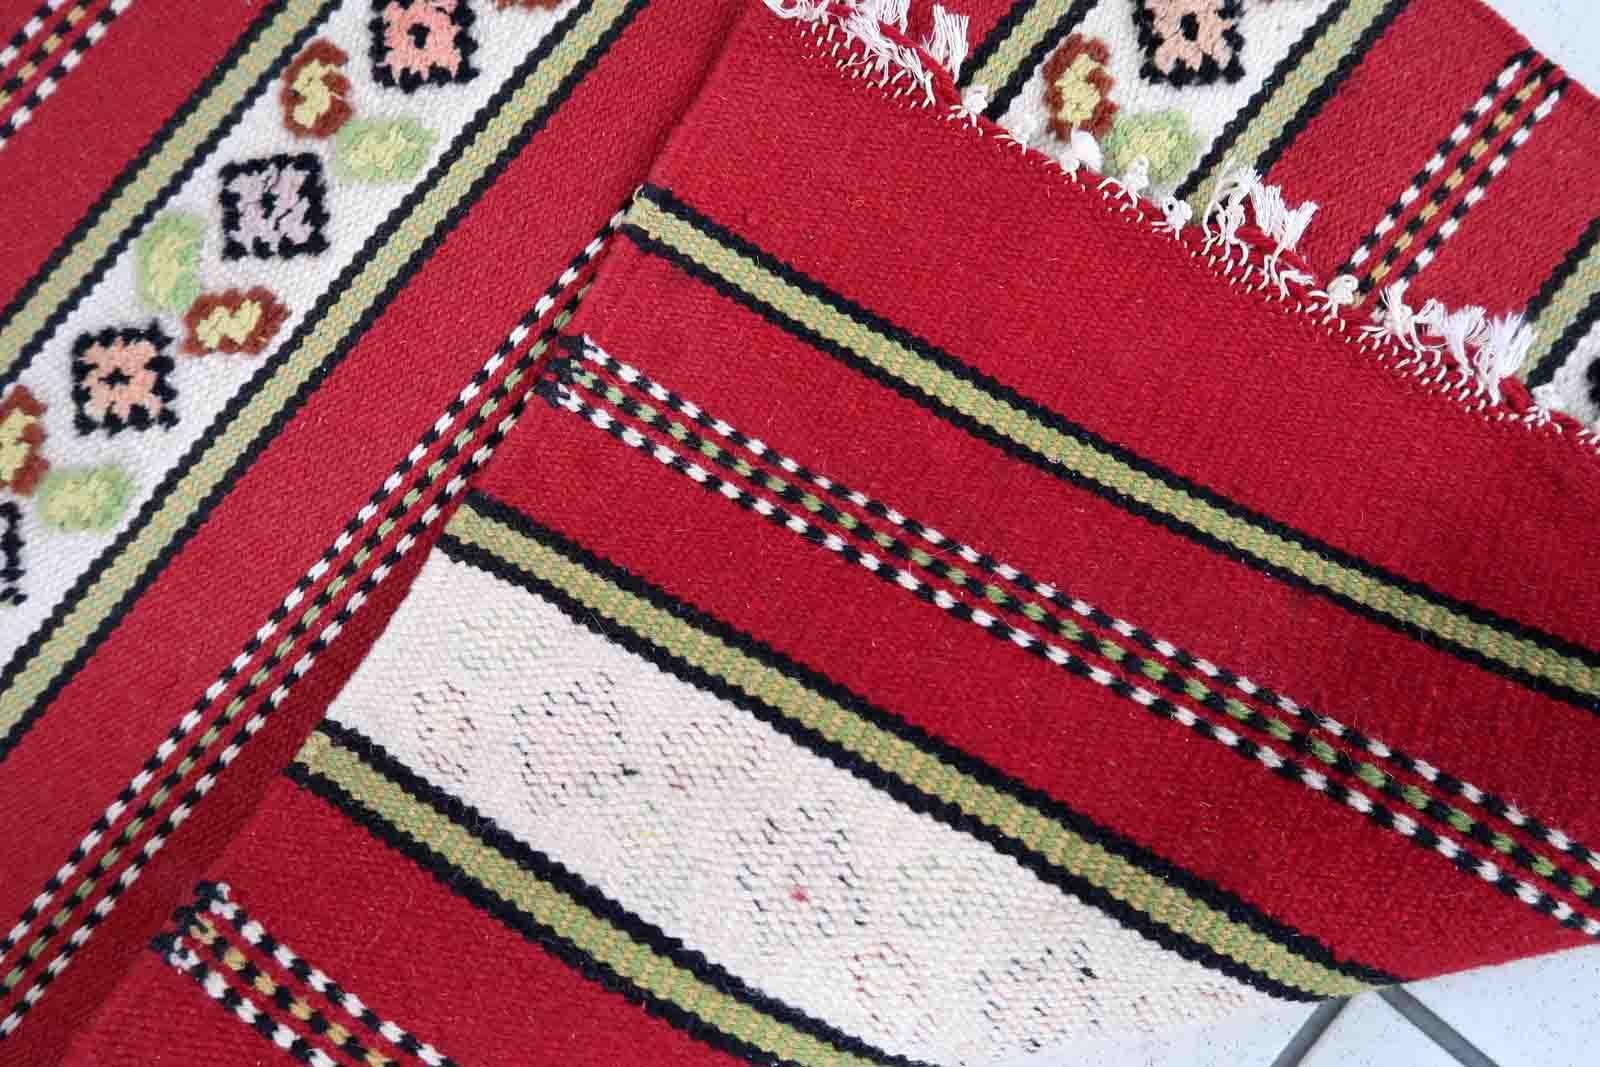 Handmade vintage Ardabil narrow runner in red and white stripes. The rug is from the end of 20th century in original good condition. 

?-condition: original good,

-circa: 1970s,

-size: 2' x 6.5' (61cm x 201cm),

-material: